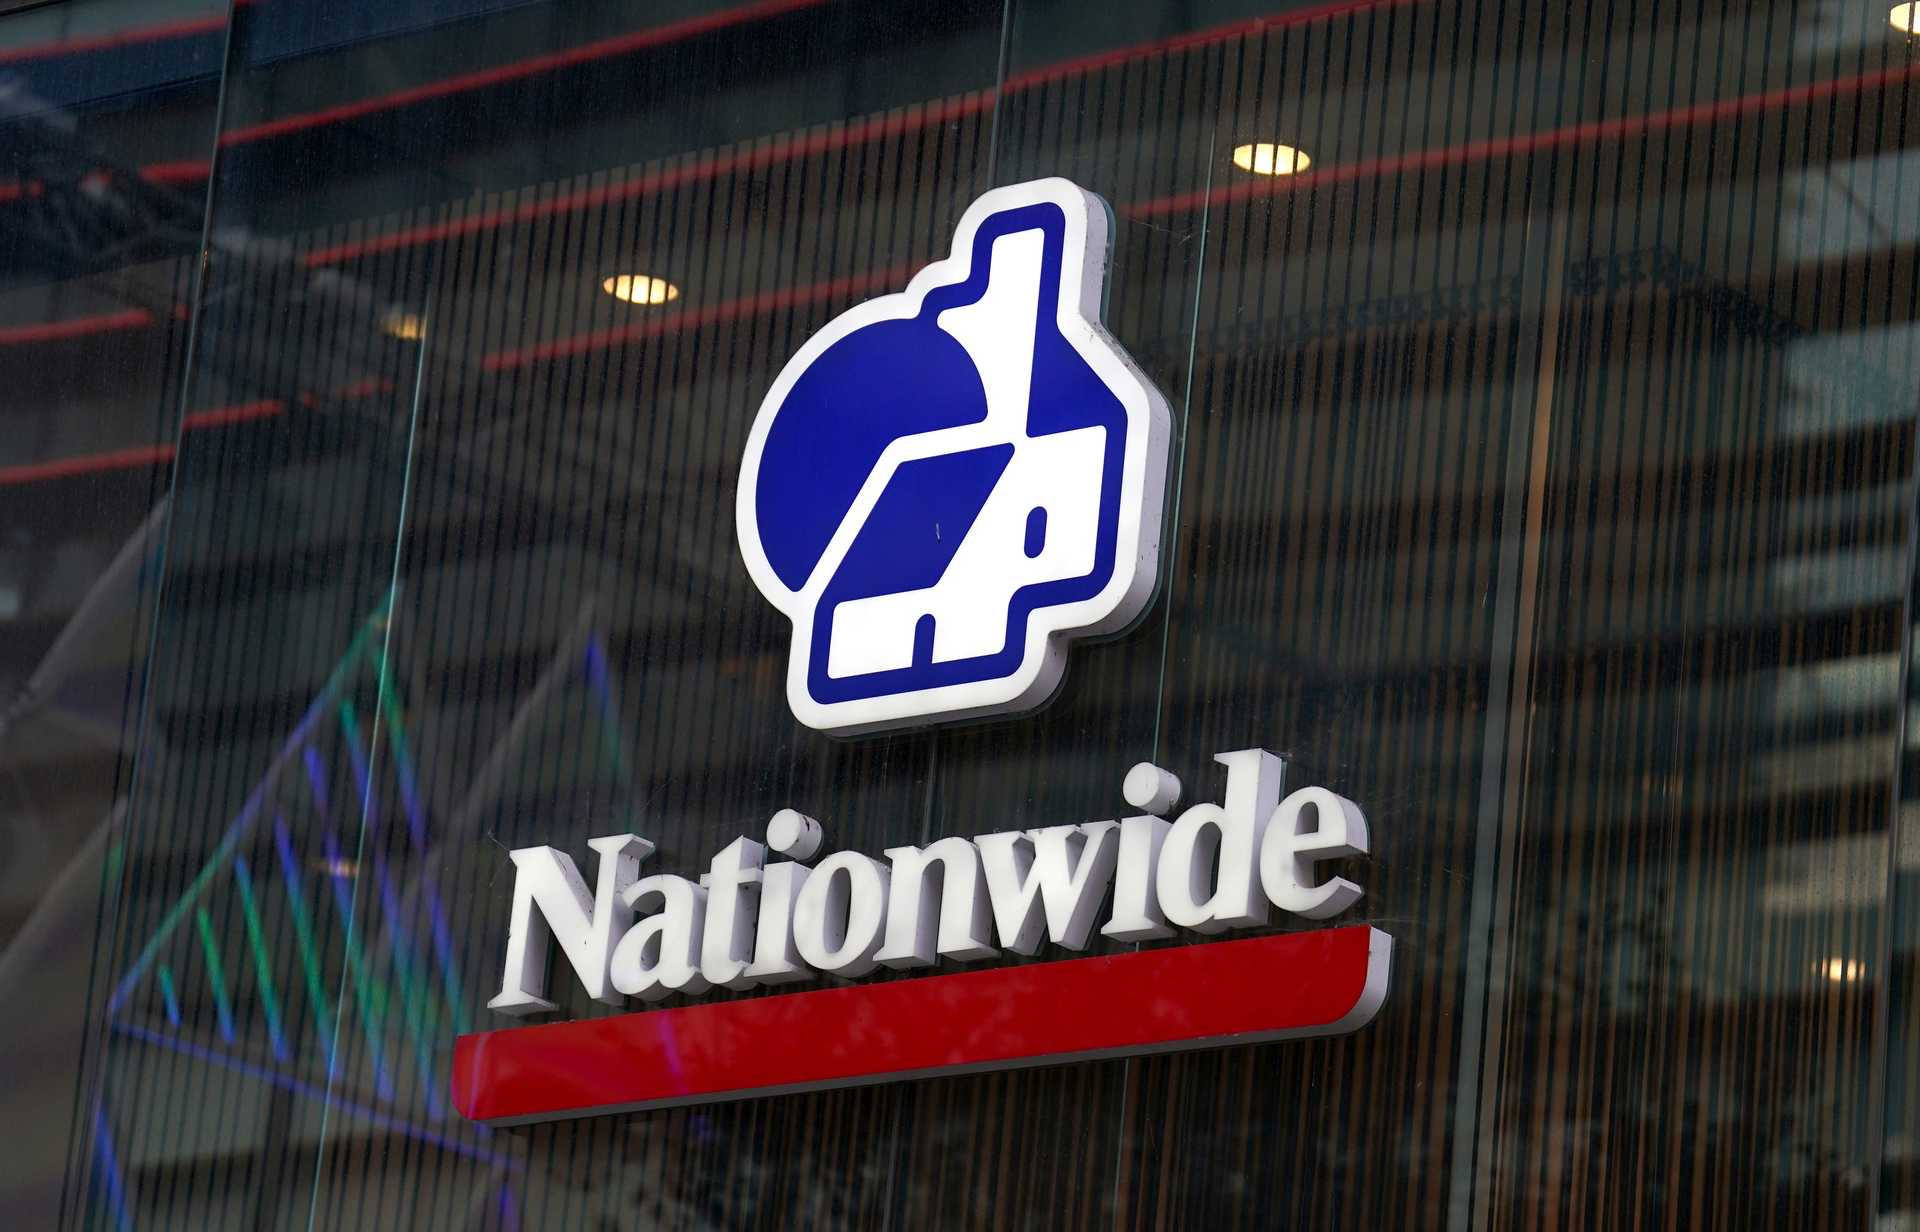 Nationwide apologised for the inconvenience.